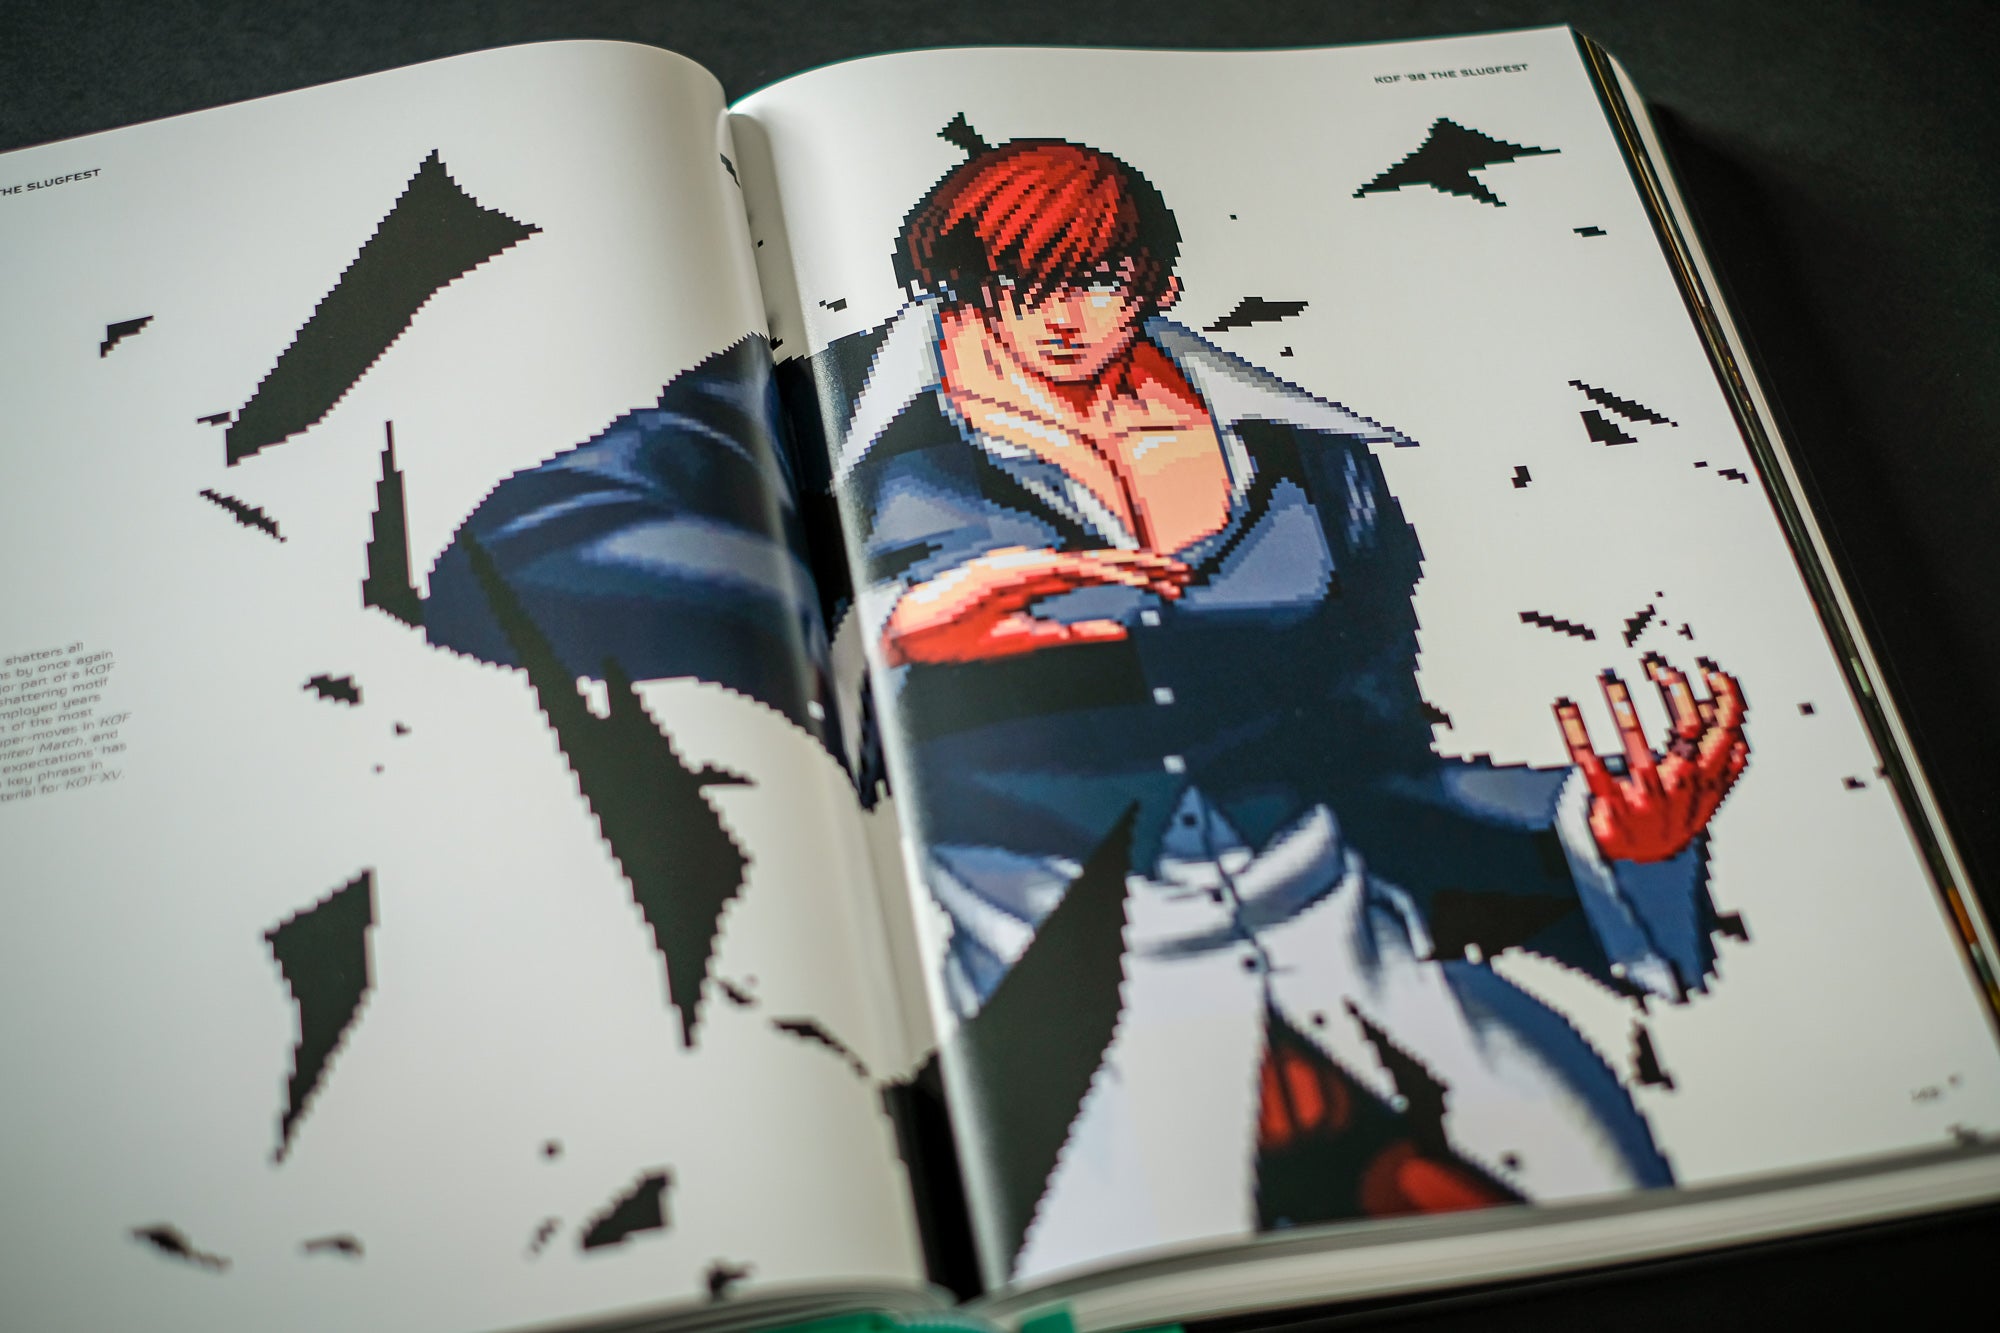 THE KING OF FIGHTERS: The Ultimate History